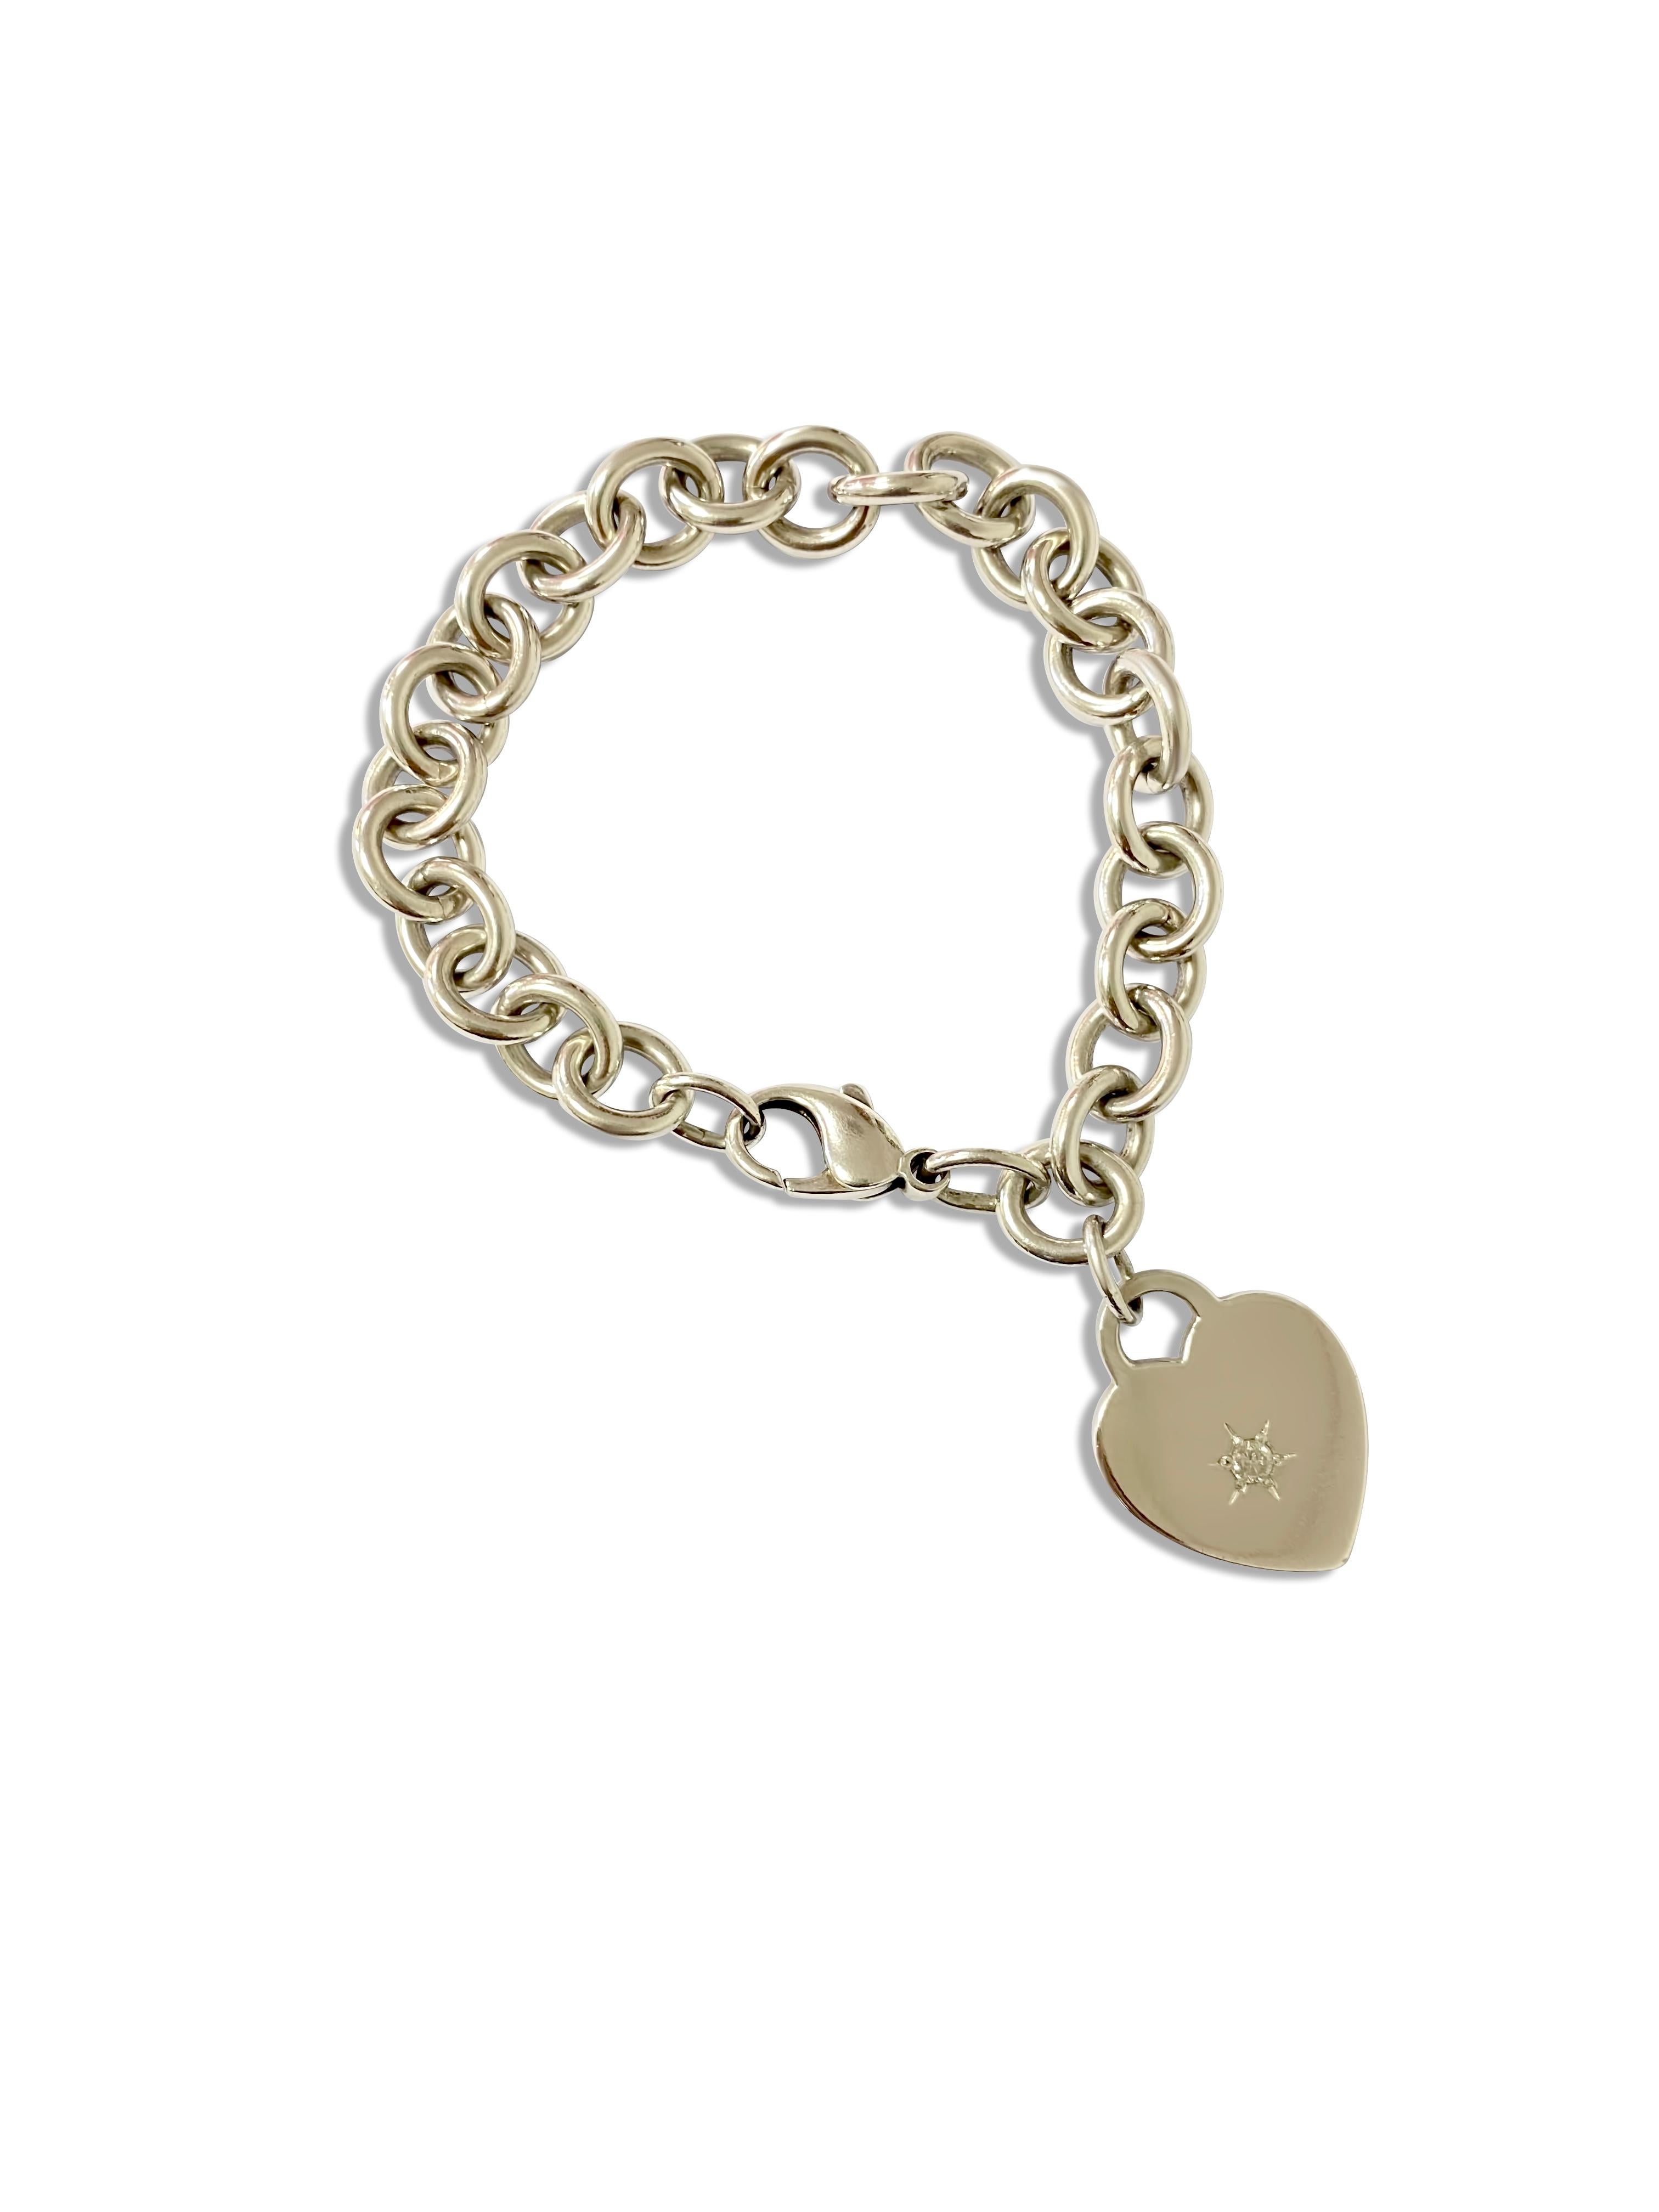 Brand: Tiffany & Co.
Metal: Sterling silver
Diamond: single round brilliant cut stone. 
Weight: 34.6 grams
Length: 7.50 inches

Beautiful heart charm Tiffany and co bracelet. In excellent condition. 

No box and no papers
